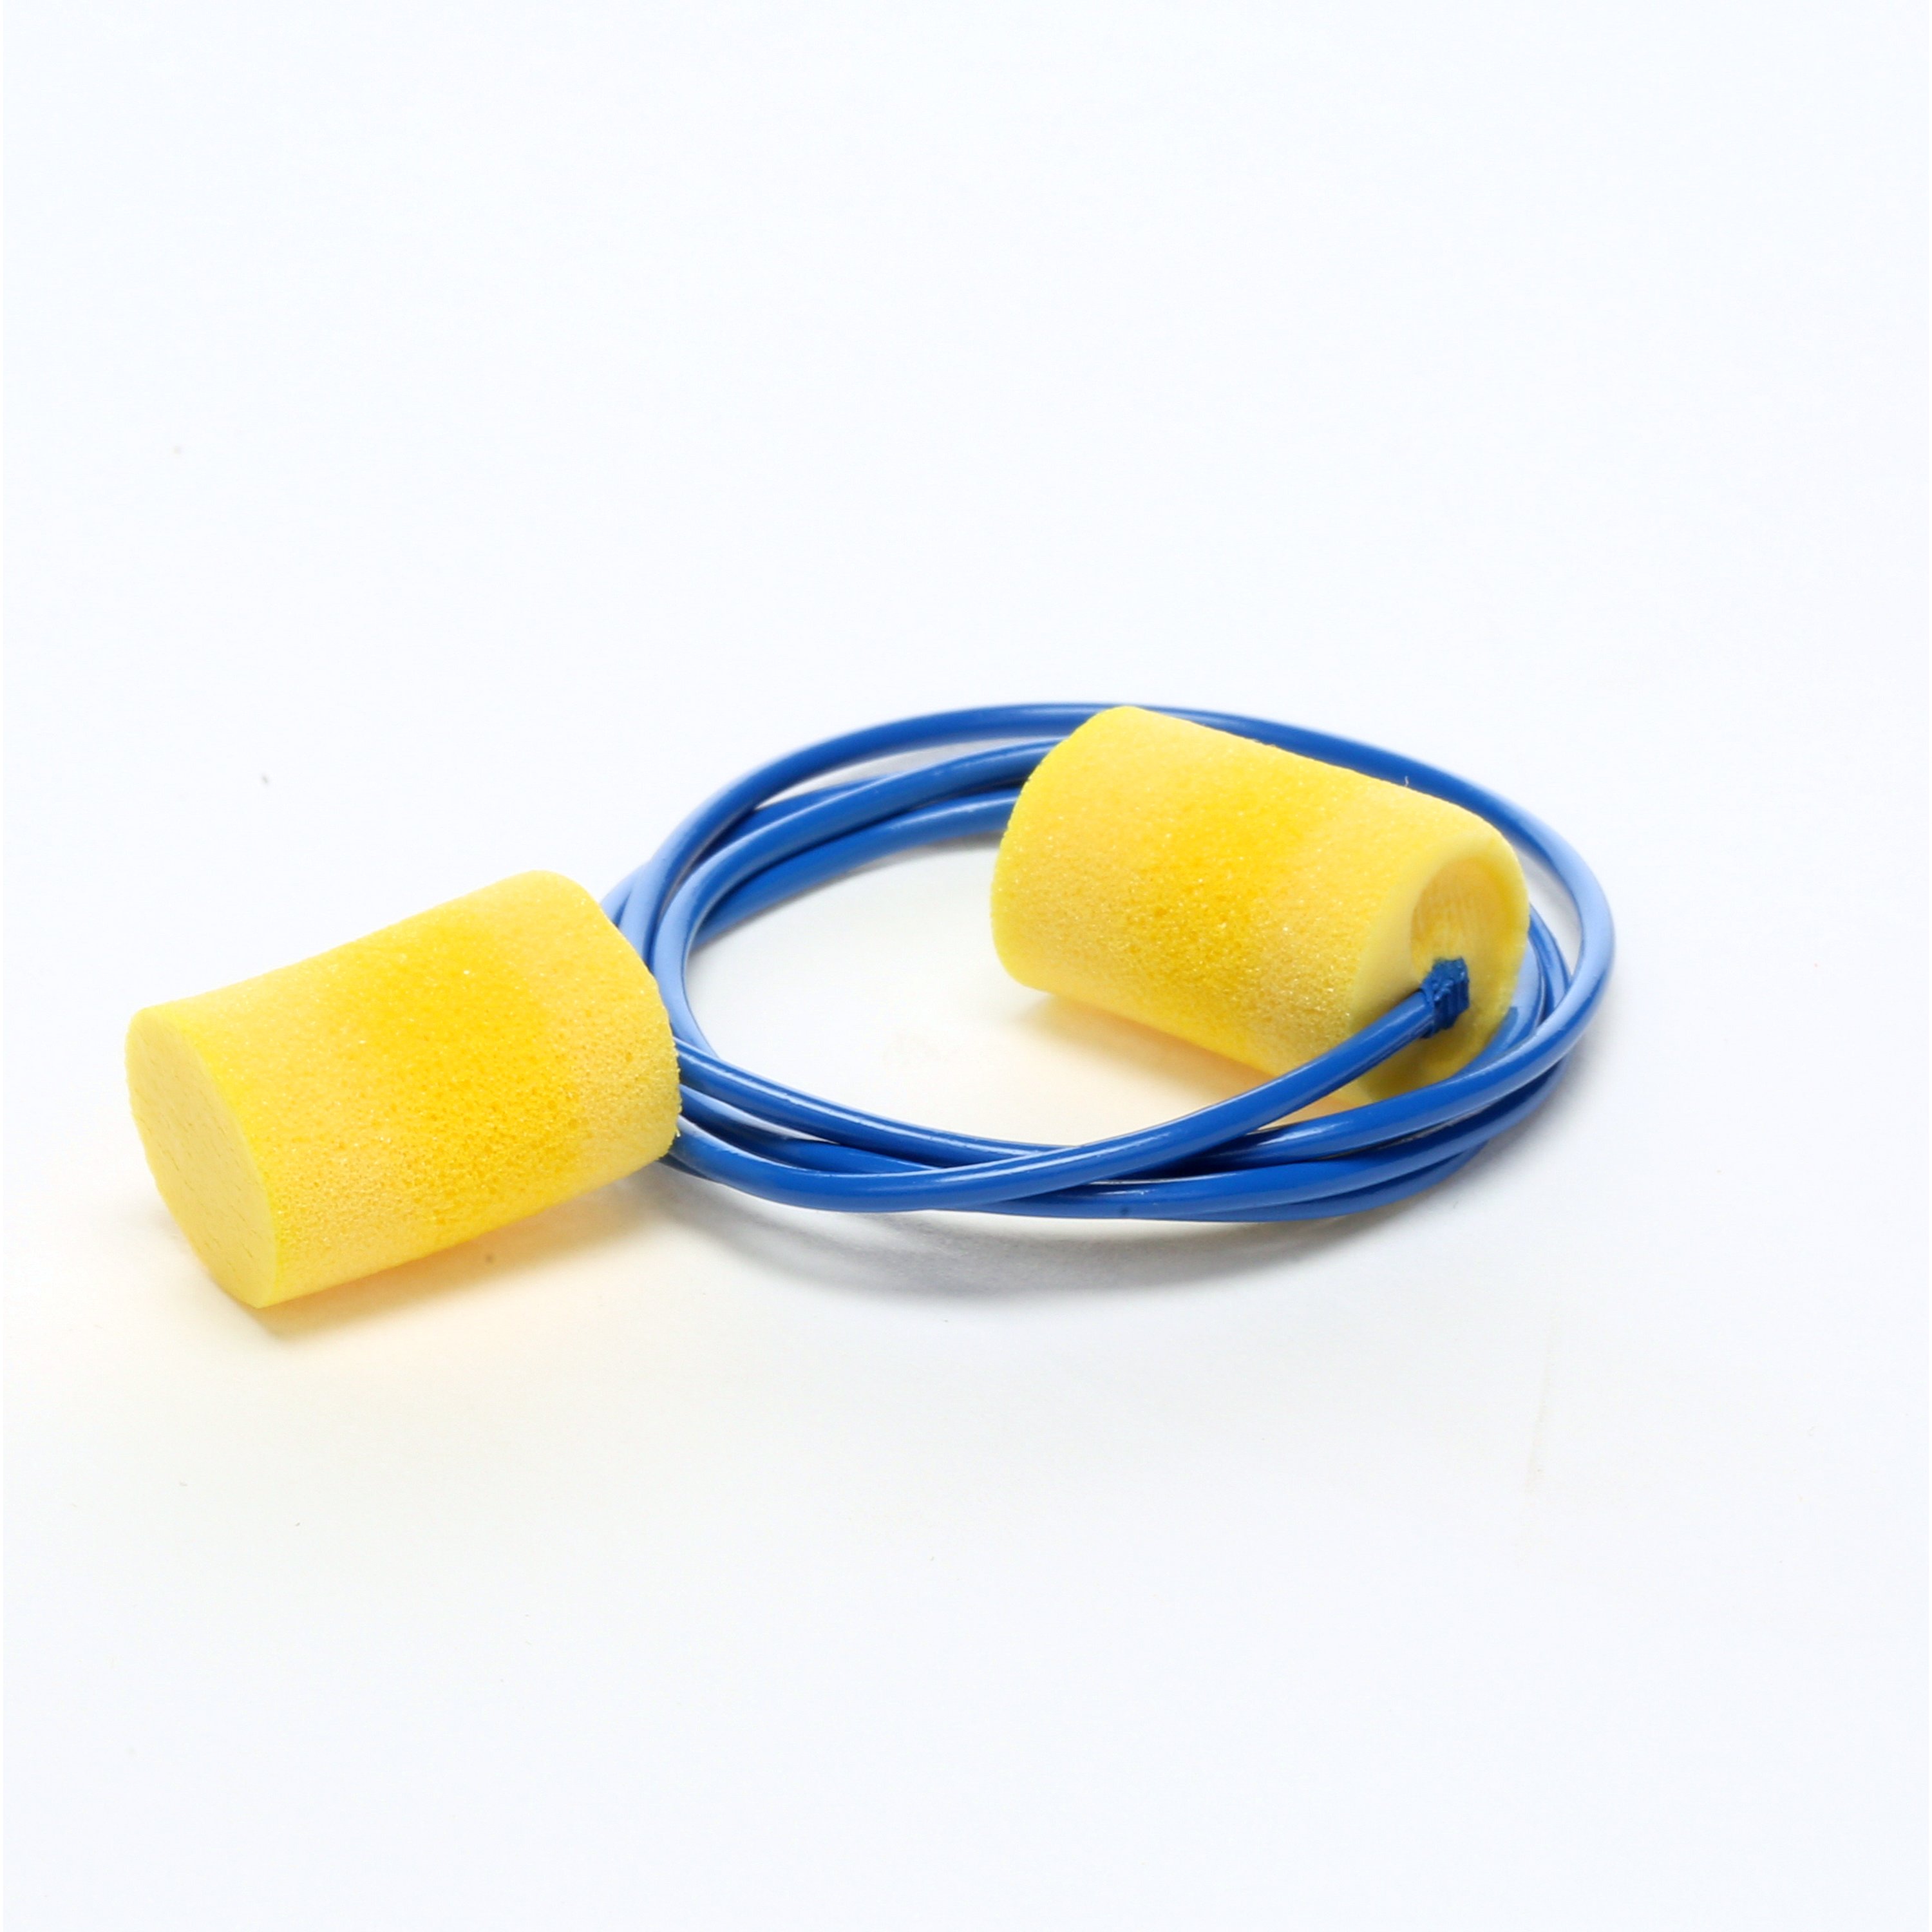 E-A-R™ Classic™ 311-1101 Earplugs, 29 dB Noise Reduction, Cylindrical Shape, ANSI S3.19-1974, Disposable, Corded Design